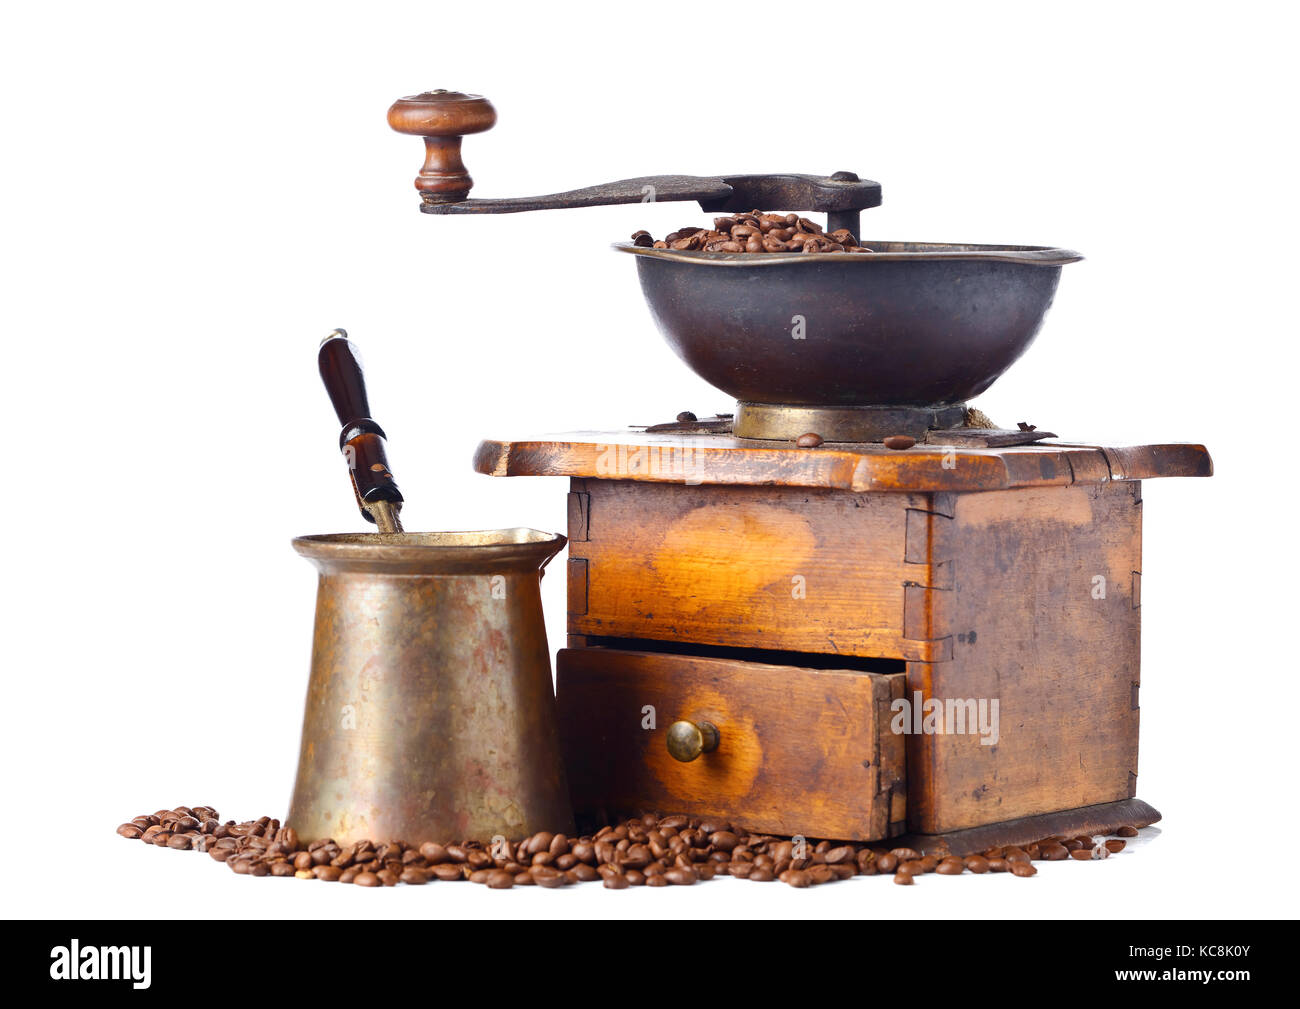 https://c8.alamy.com/comp/KC8K0Y/old-coffee-grinder-coffee-maker-and-roasted-coffee-beans-isolated-KC8K0Y.jpg